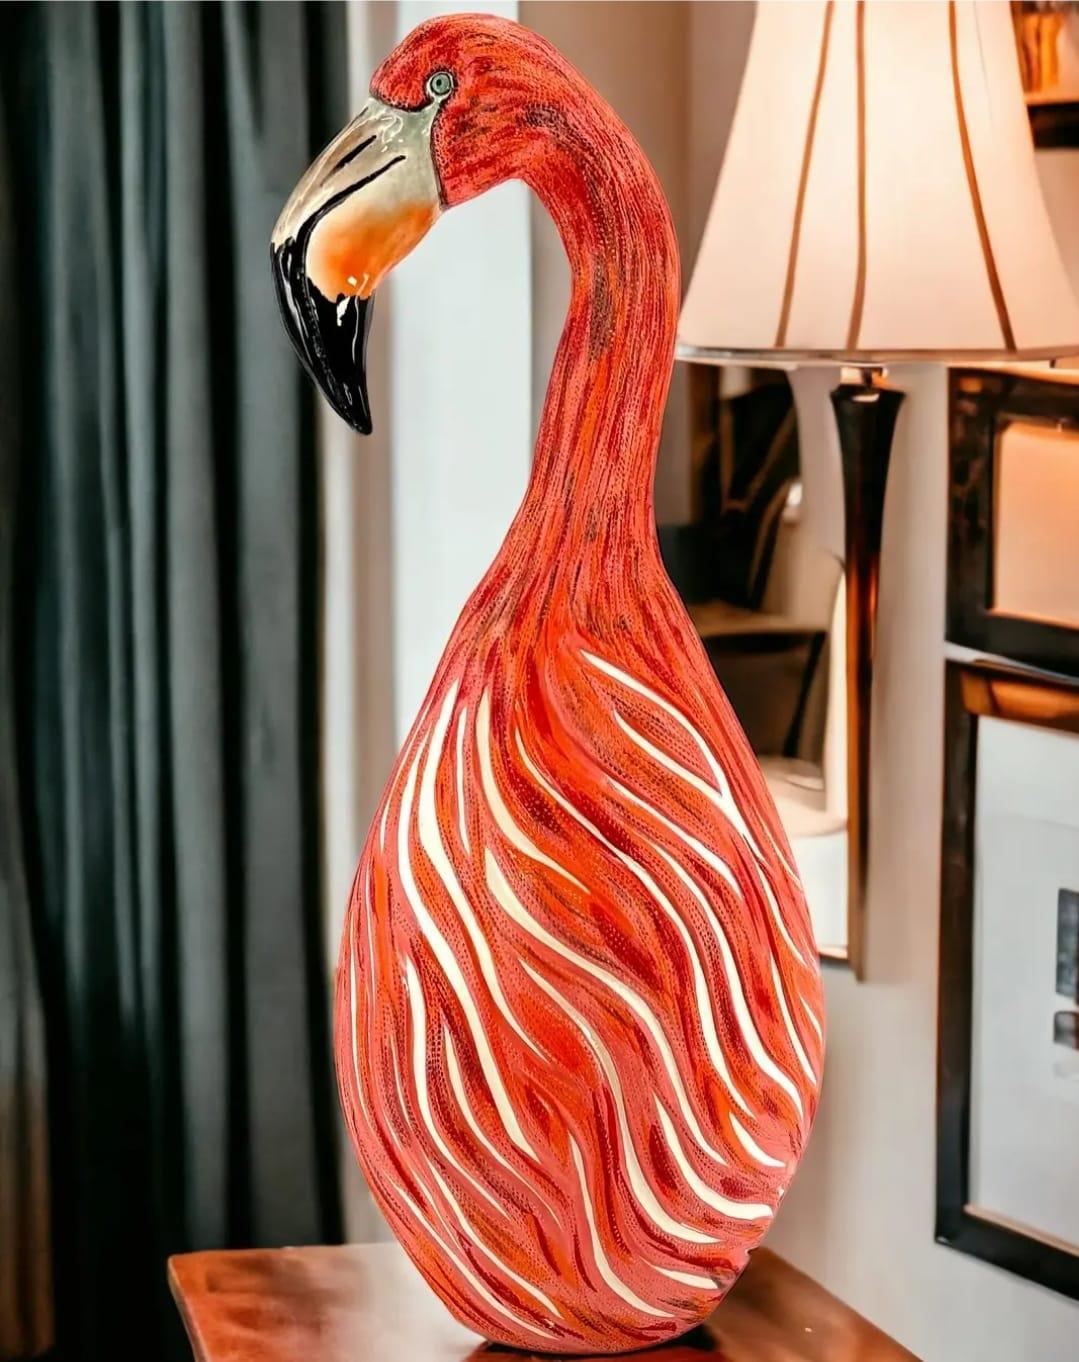 The piece is a unique representation of a Pink Flamingo in a modern way. The animal is gently painted with a pink different shades. The flamingo lives in Italy especially in Sicily. They can be seen in the salty seas of Trapani.
Our designer creates